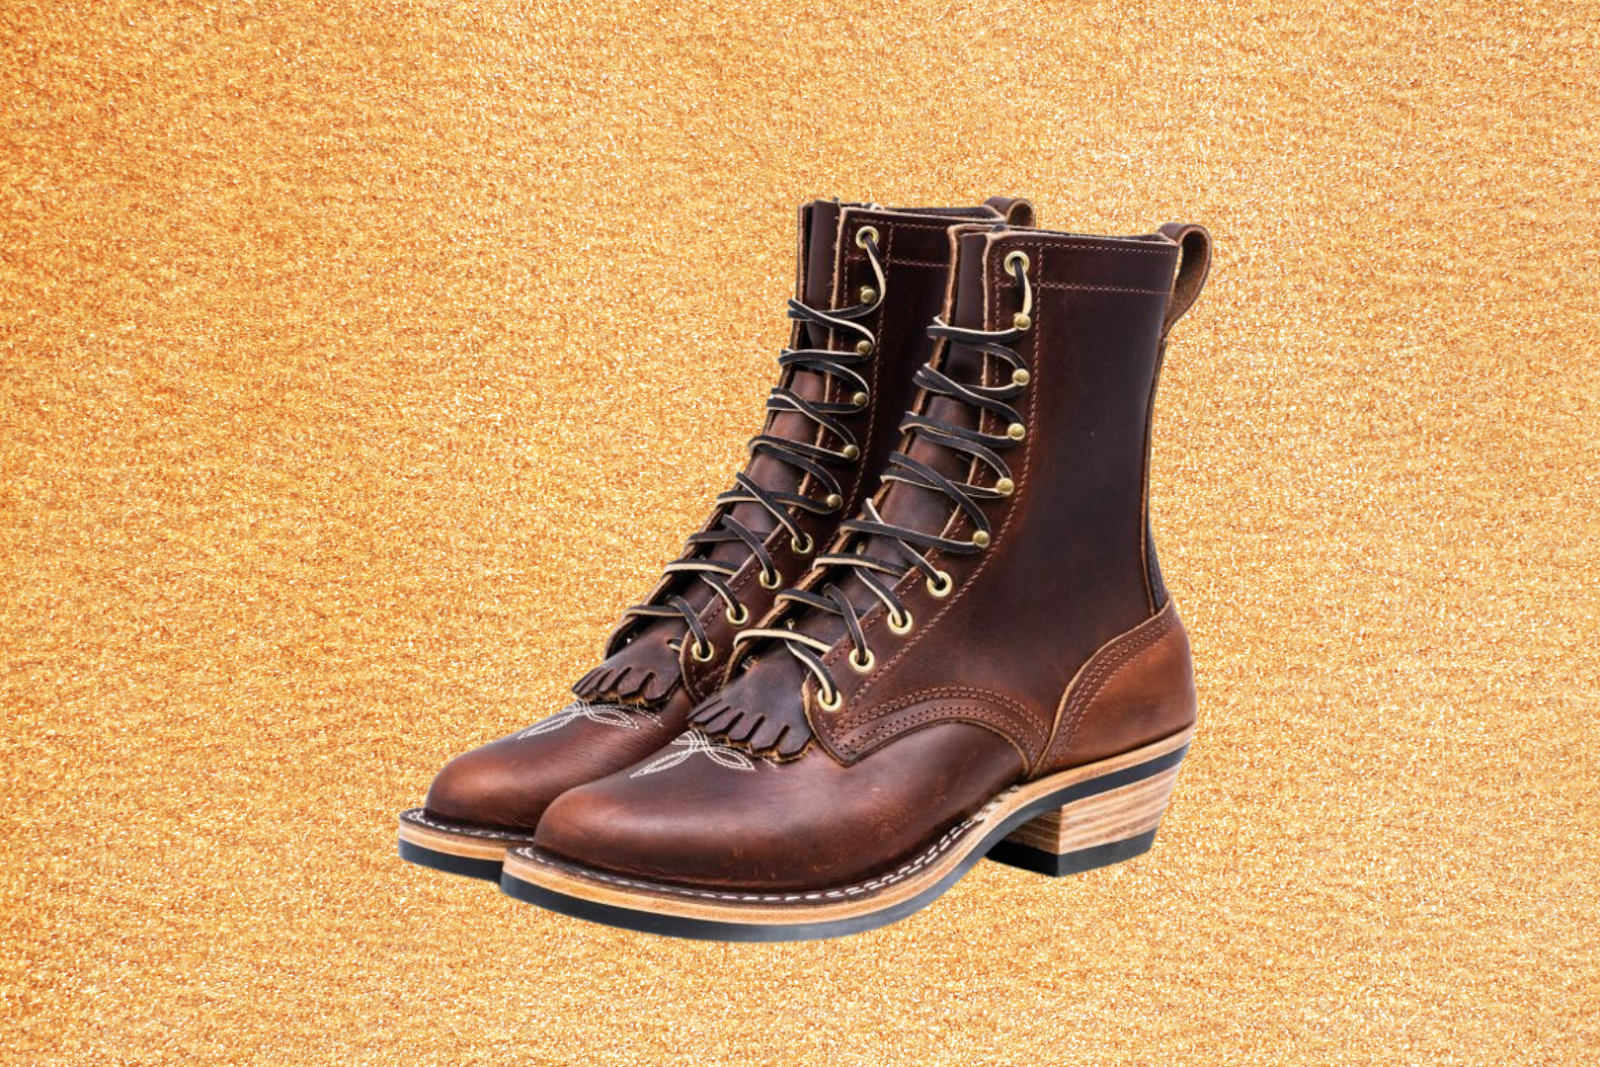 What Are The Benefits Of Western Boots?